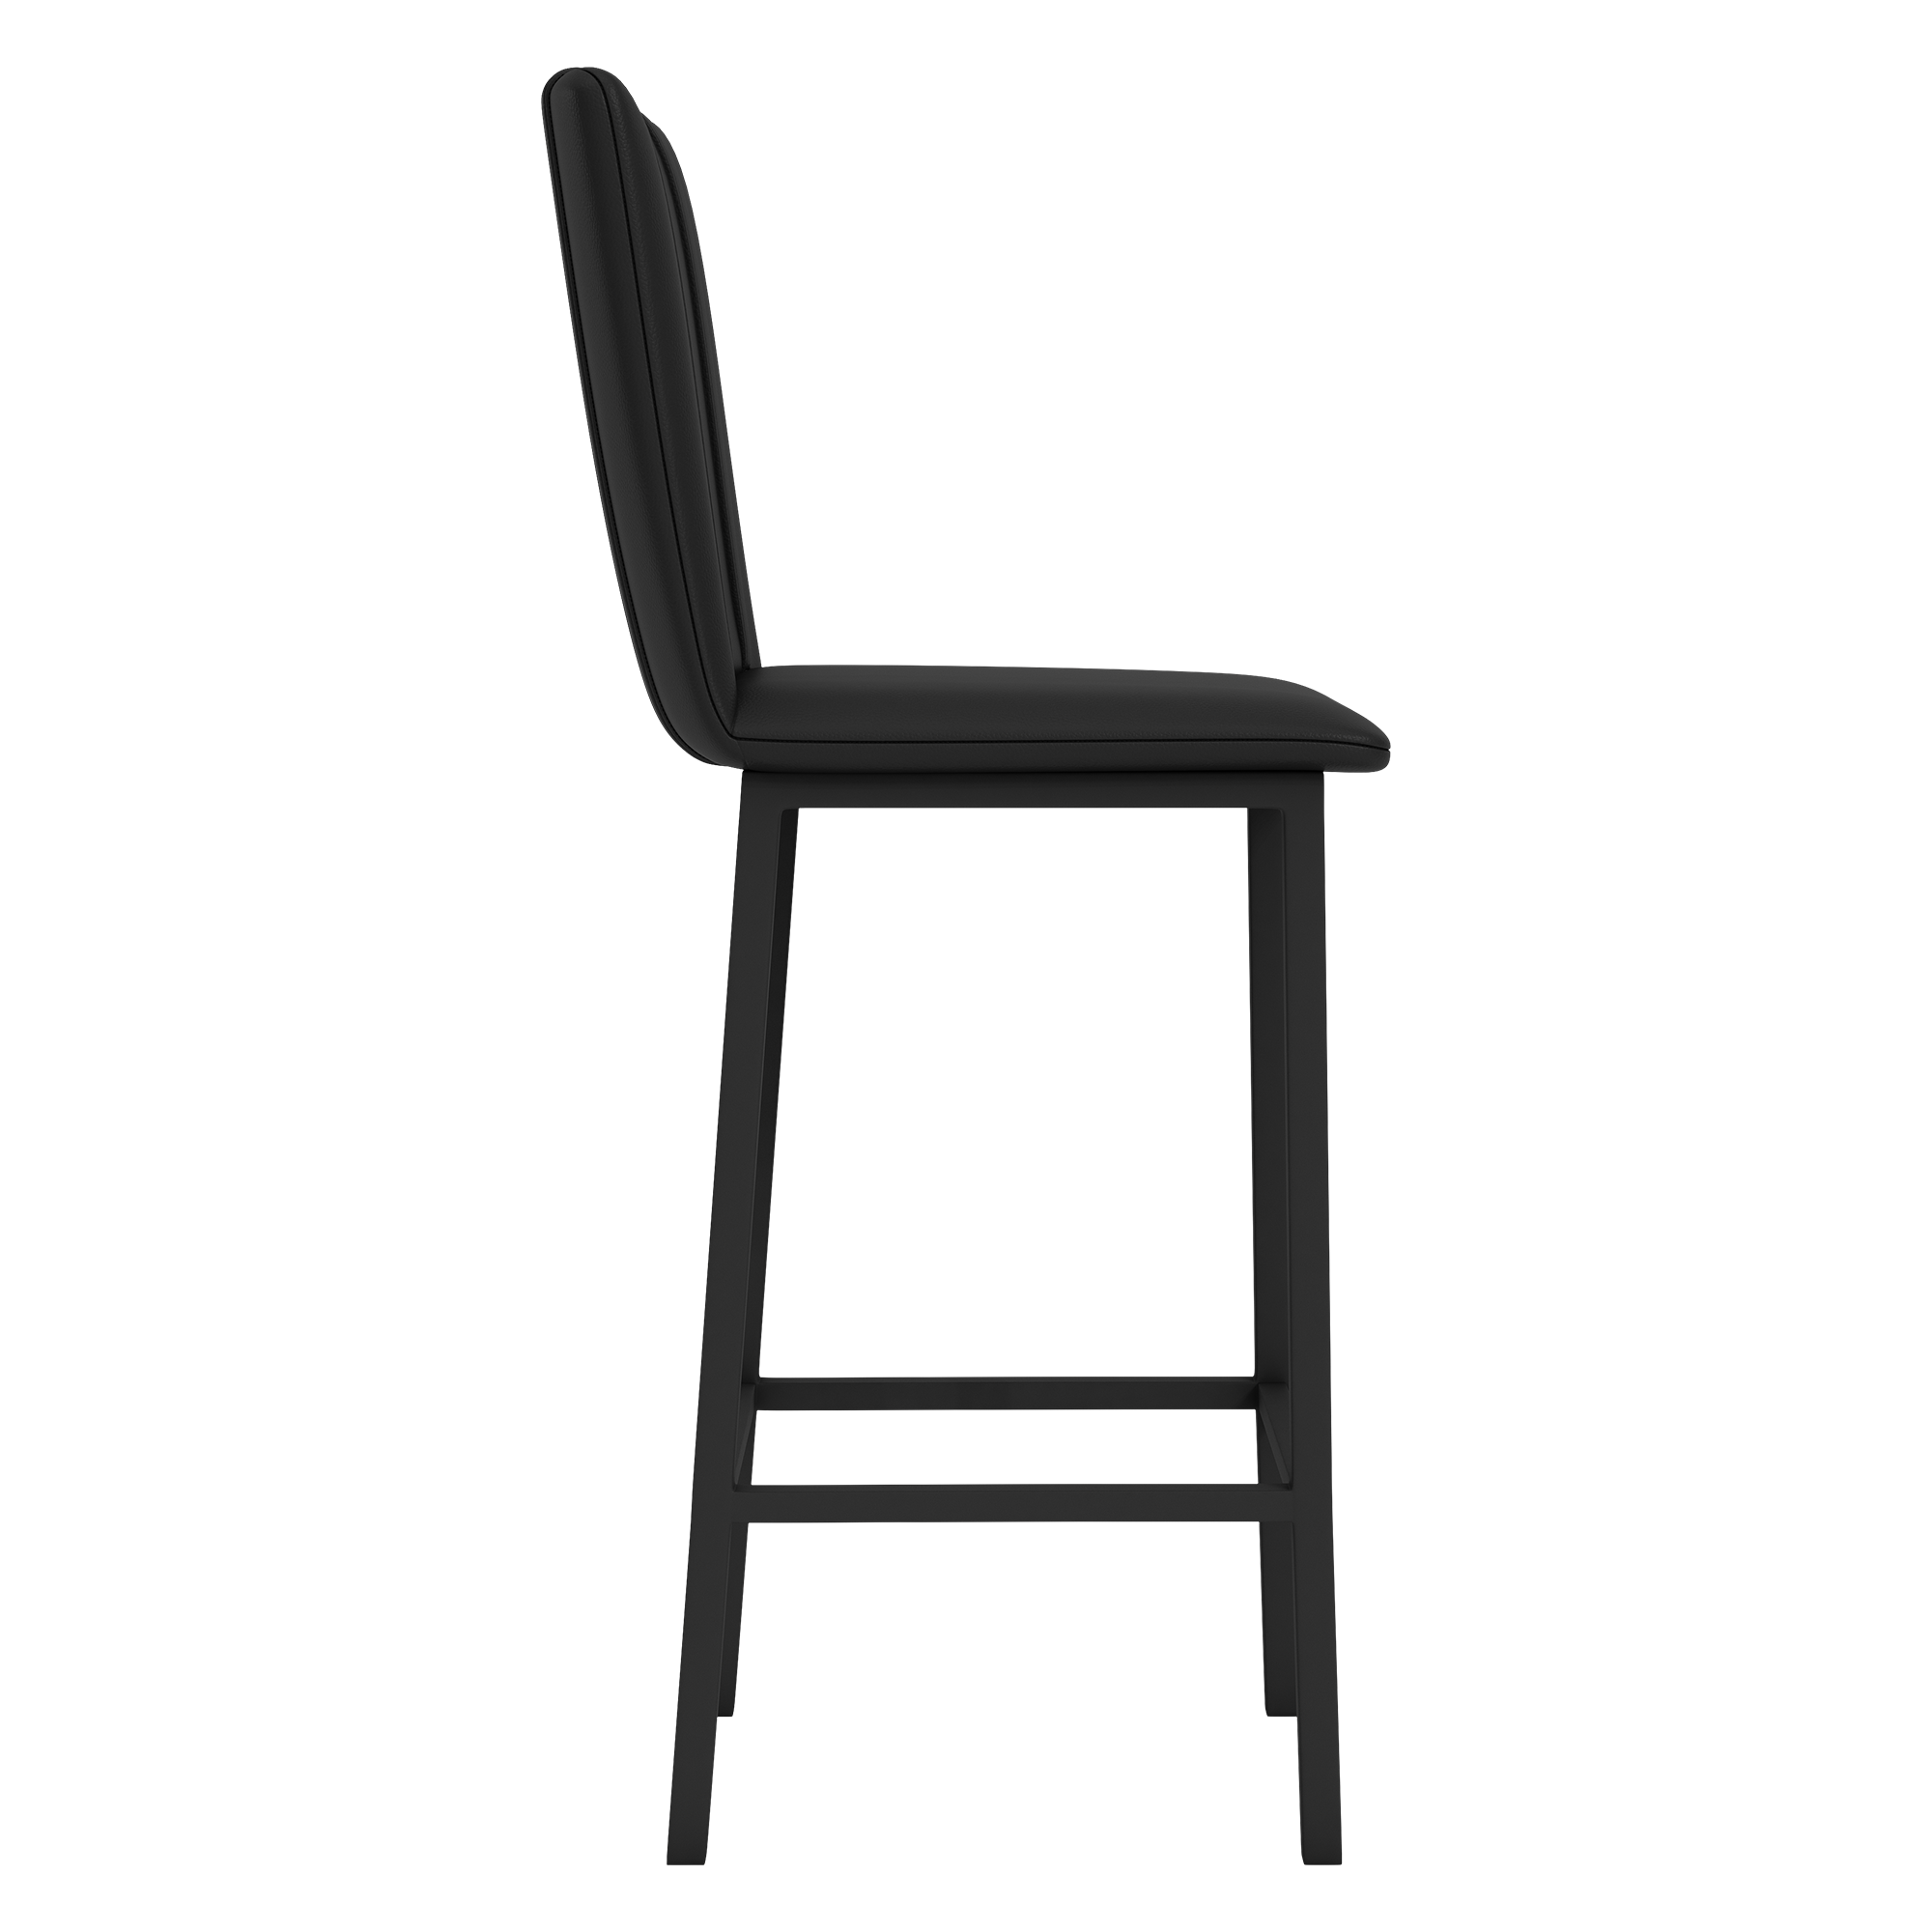 Bar Stool 500 with Oakland Athletics Cooperstown Set of 2